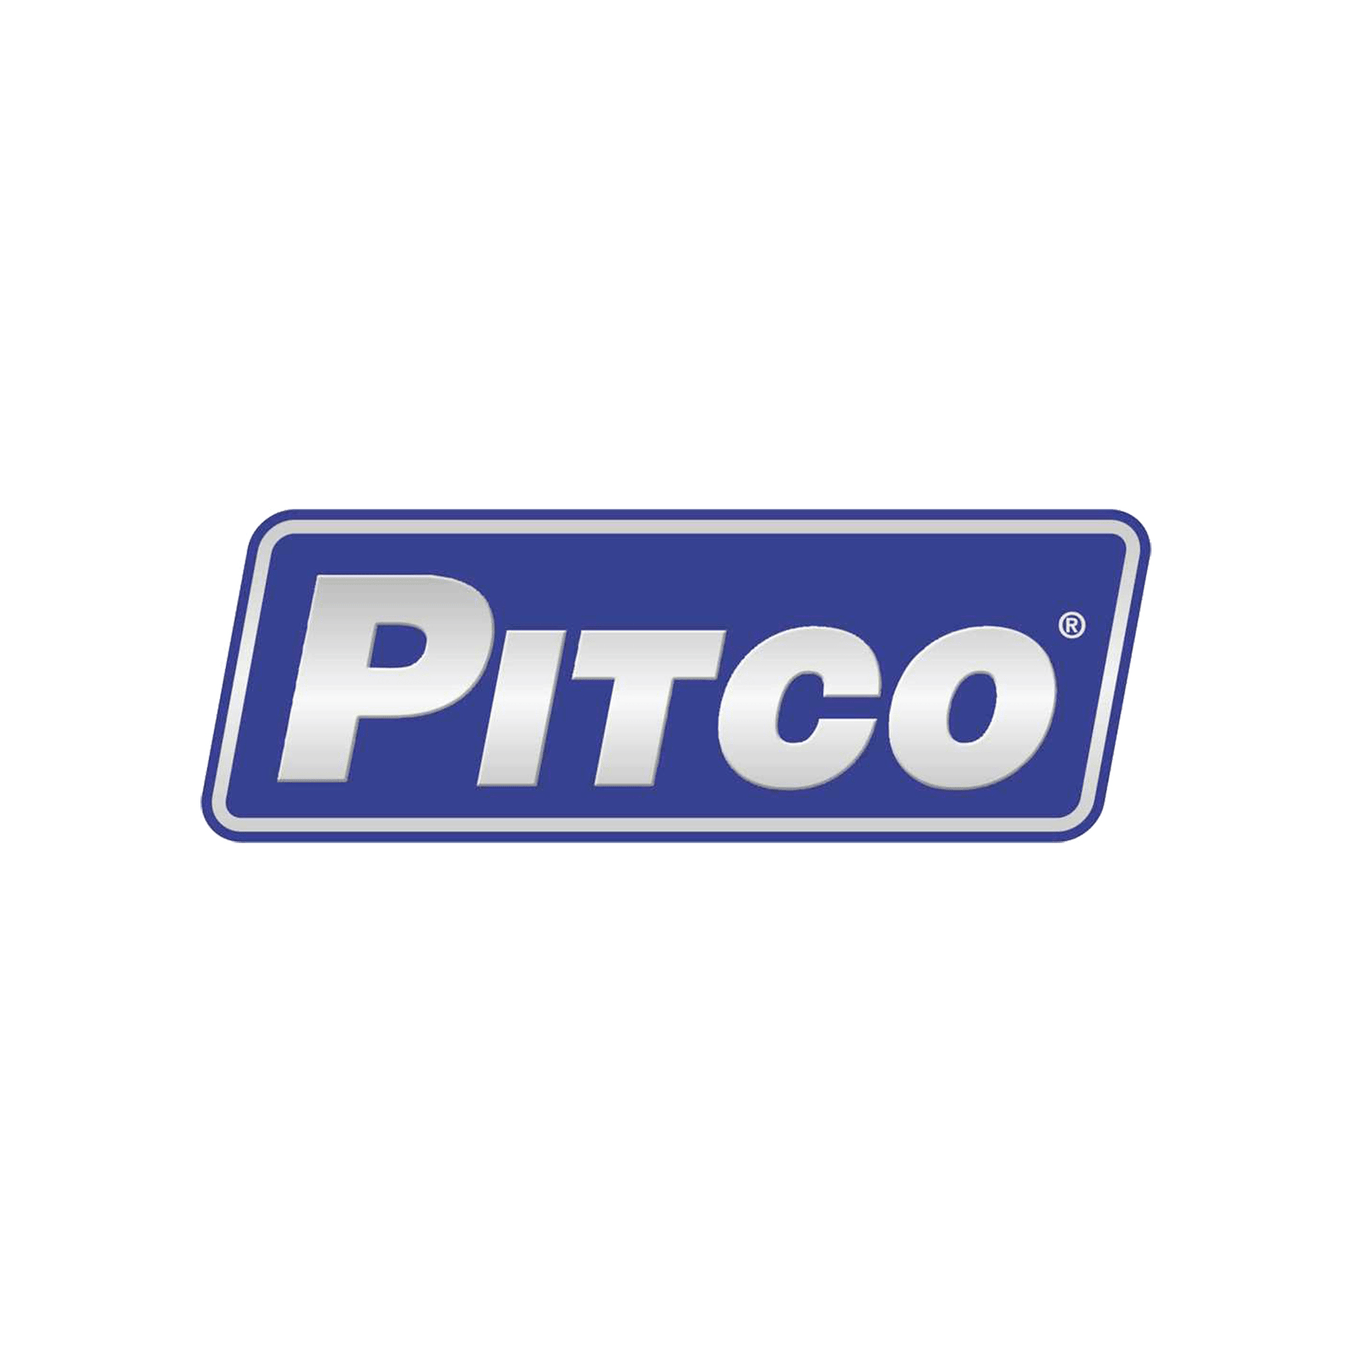 Pitco - Gecko Catering Equipment